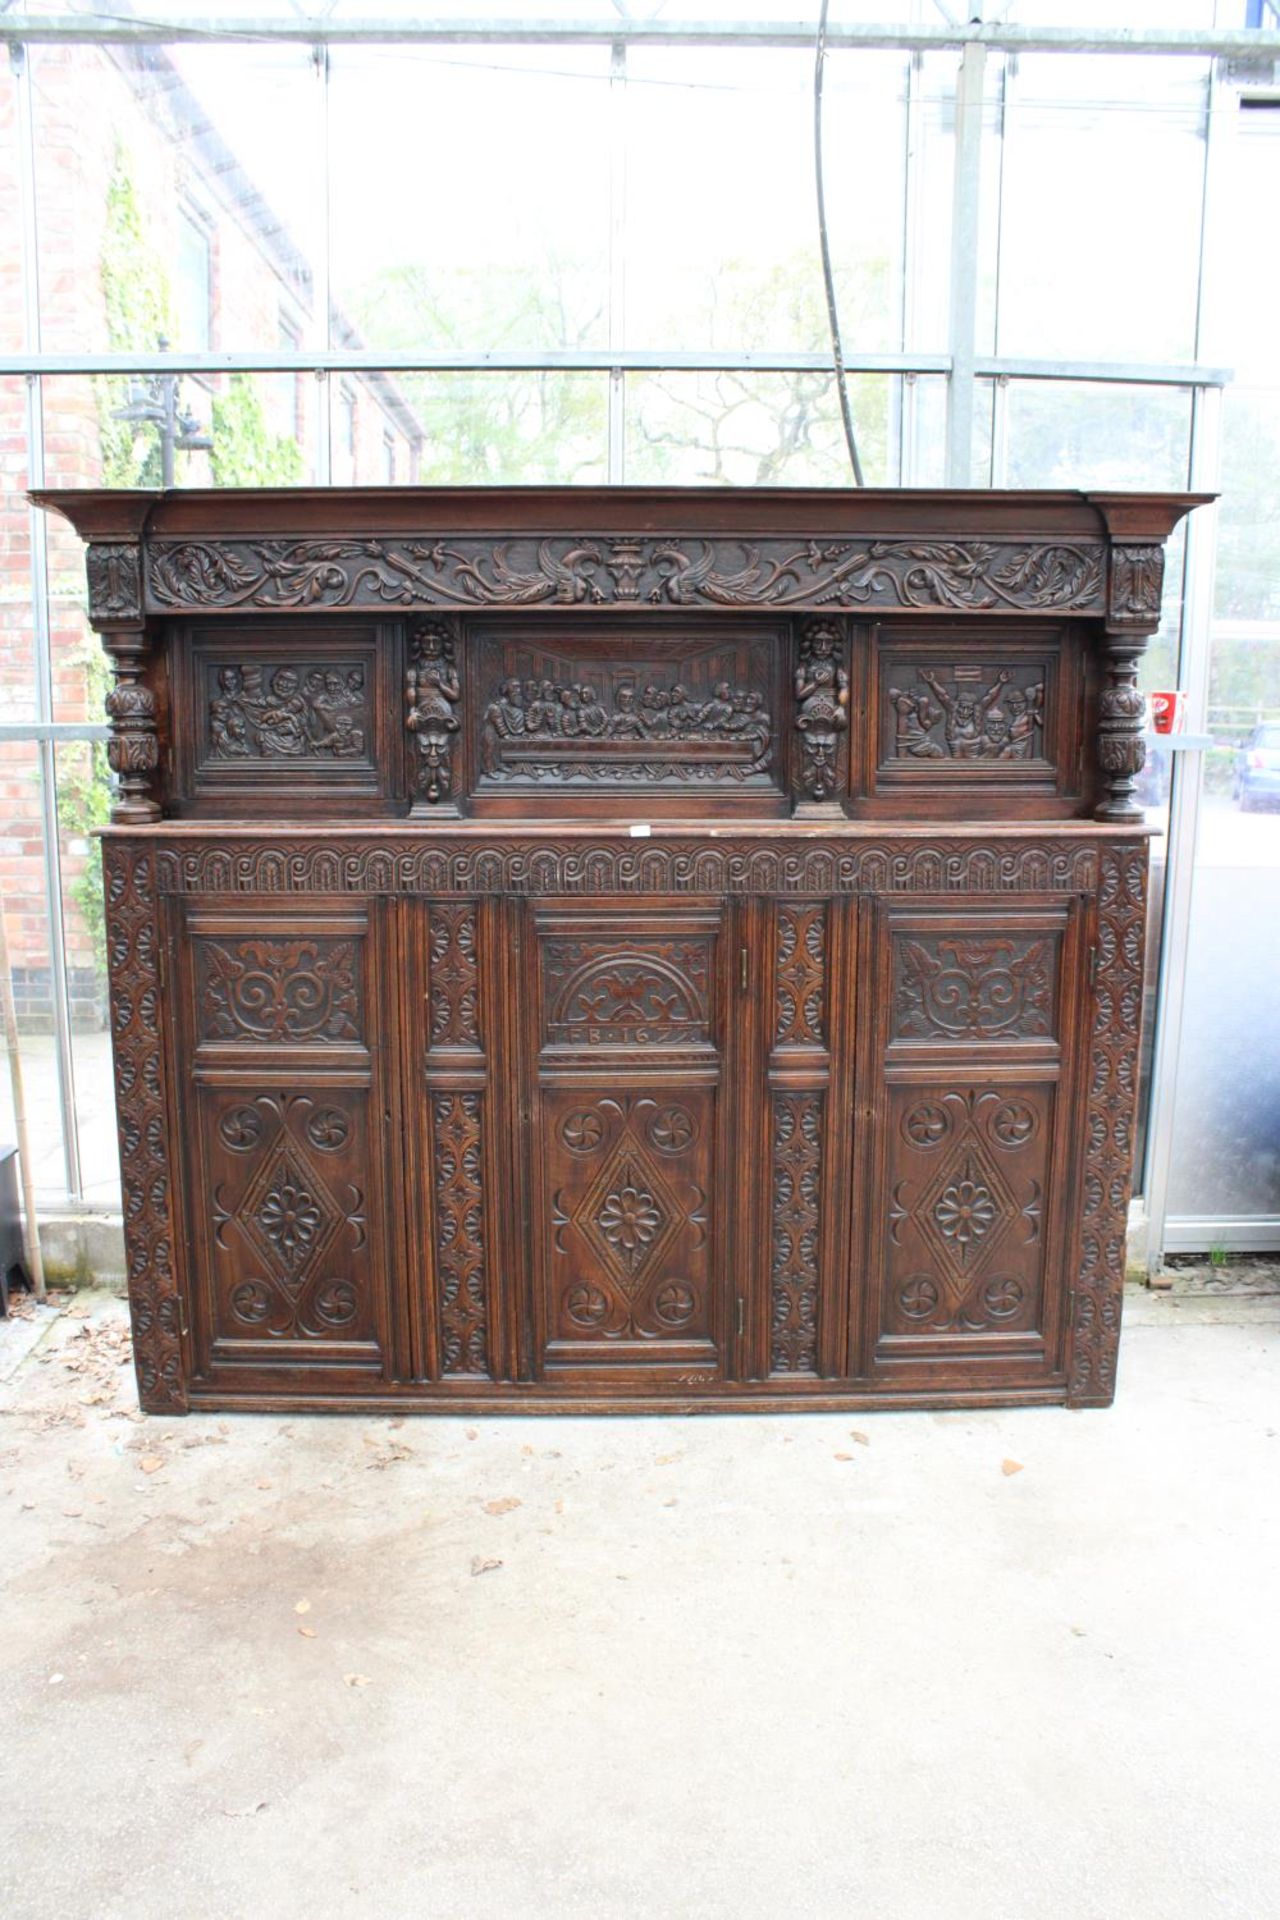 AN OAK GEORGE III STYLE COURT CUPBOARD WITH CARVED PANELS, THREE DEPICTING THE BIRTH AND